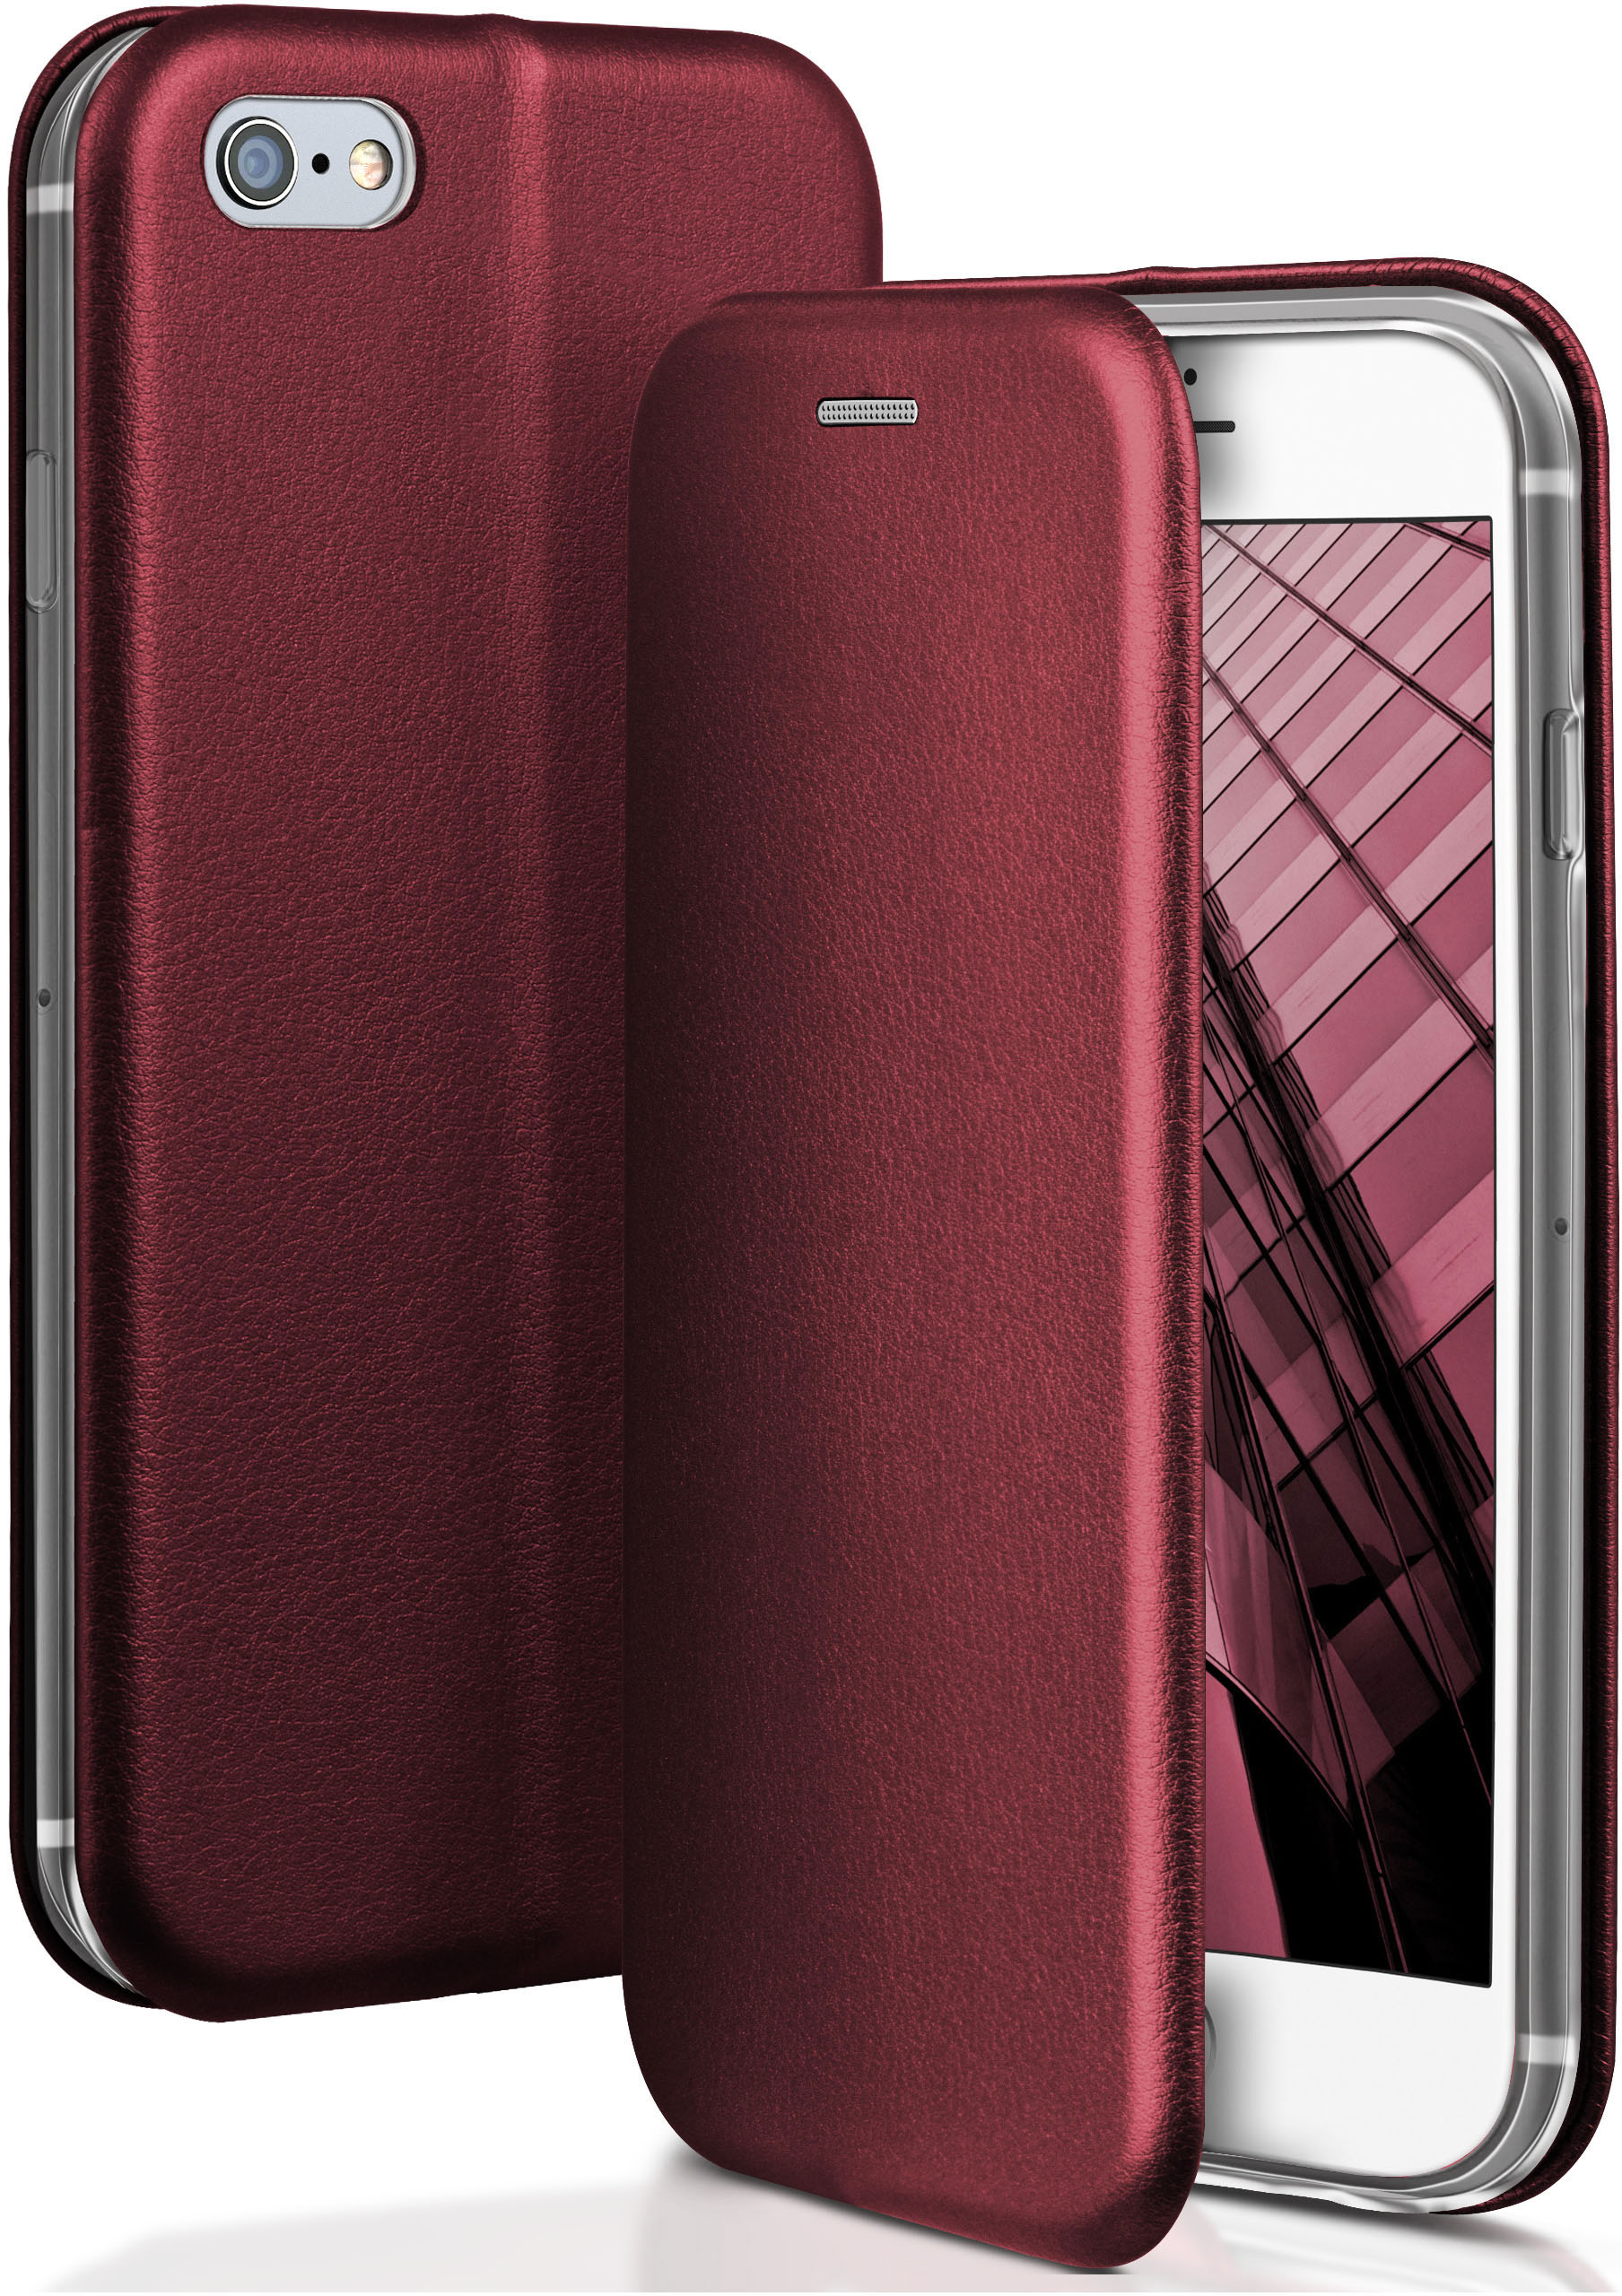 ONEFLOW Business Case, Flip Cover, / iPhone iPhone Red 6, Burgund Apple, - 6s